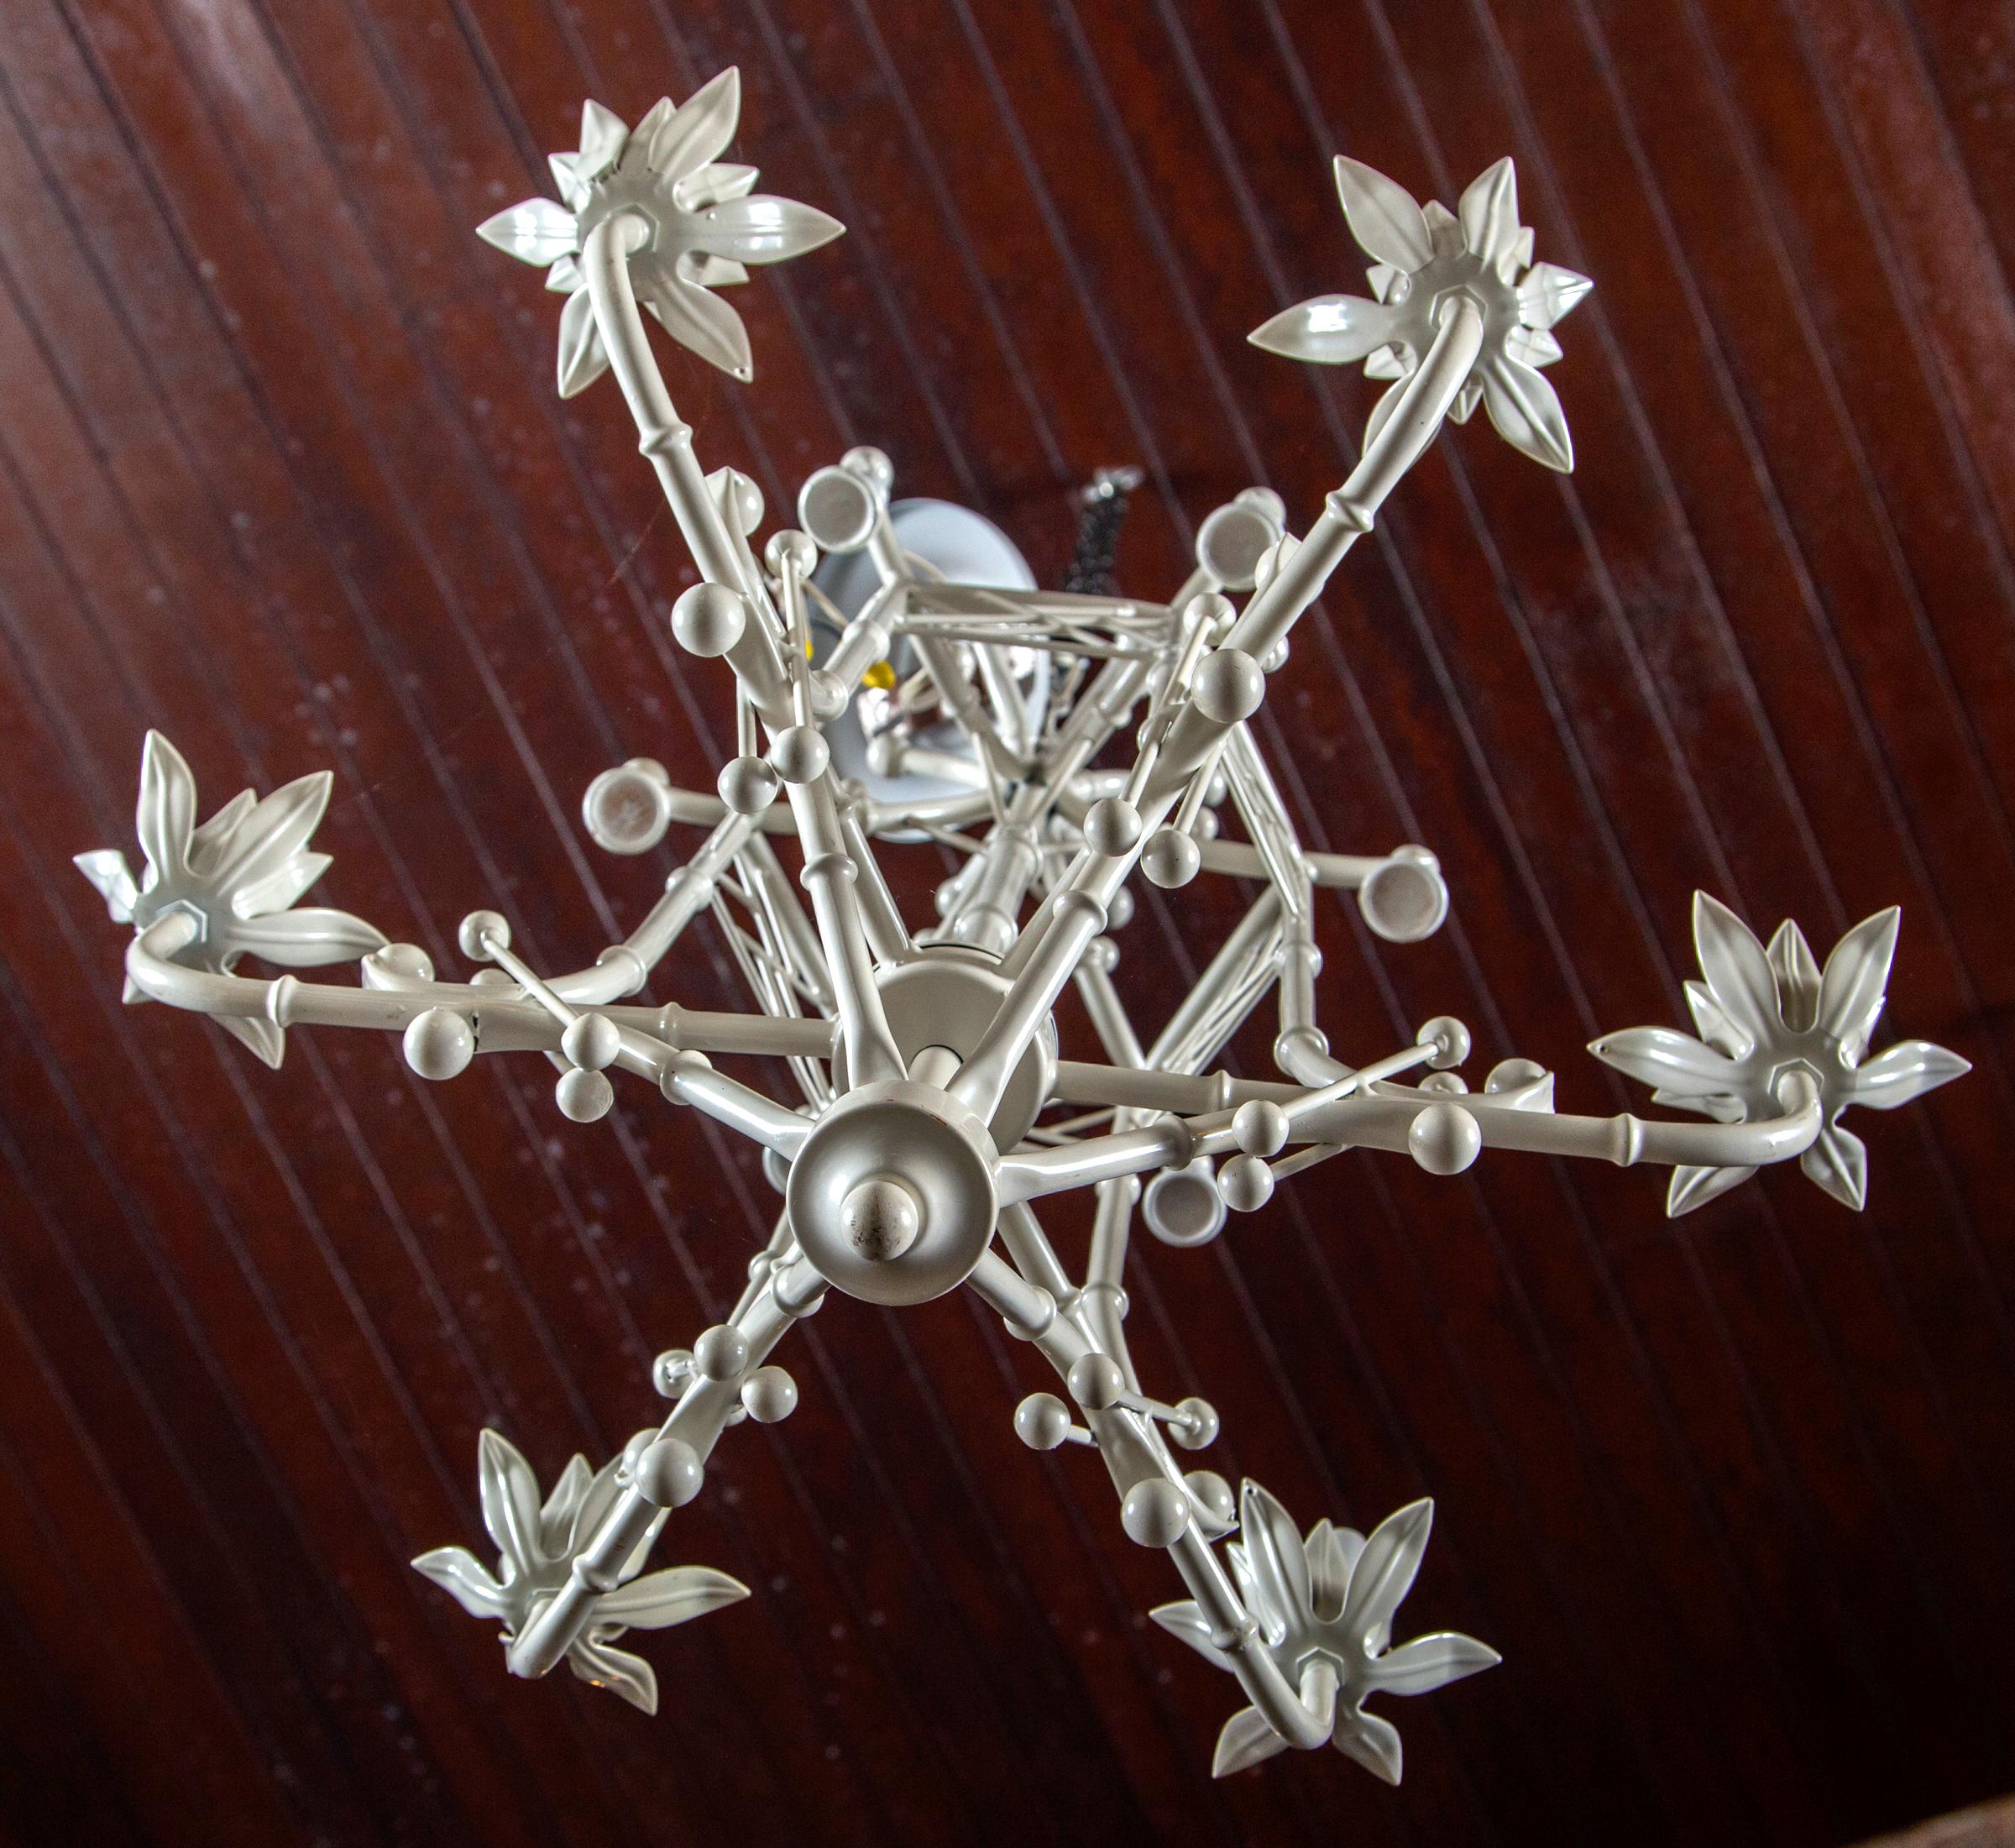 Small intricate chinoiserie chandelier with ball, bells, fretwork and canopy. It requires six chandelier size bulbs.